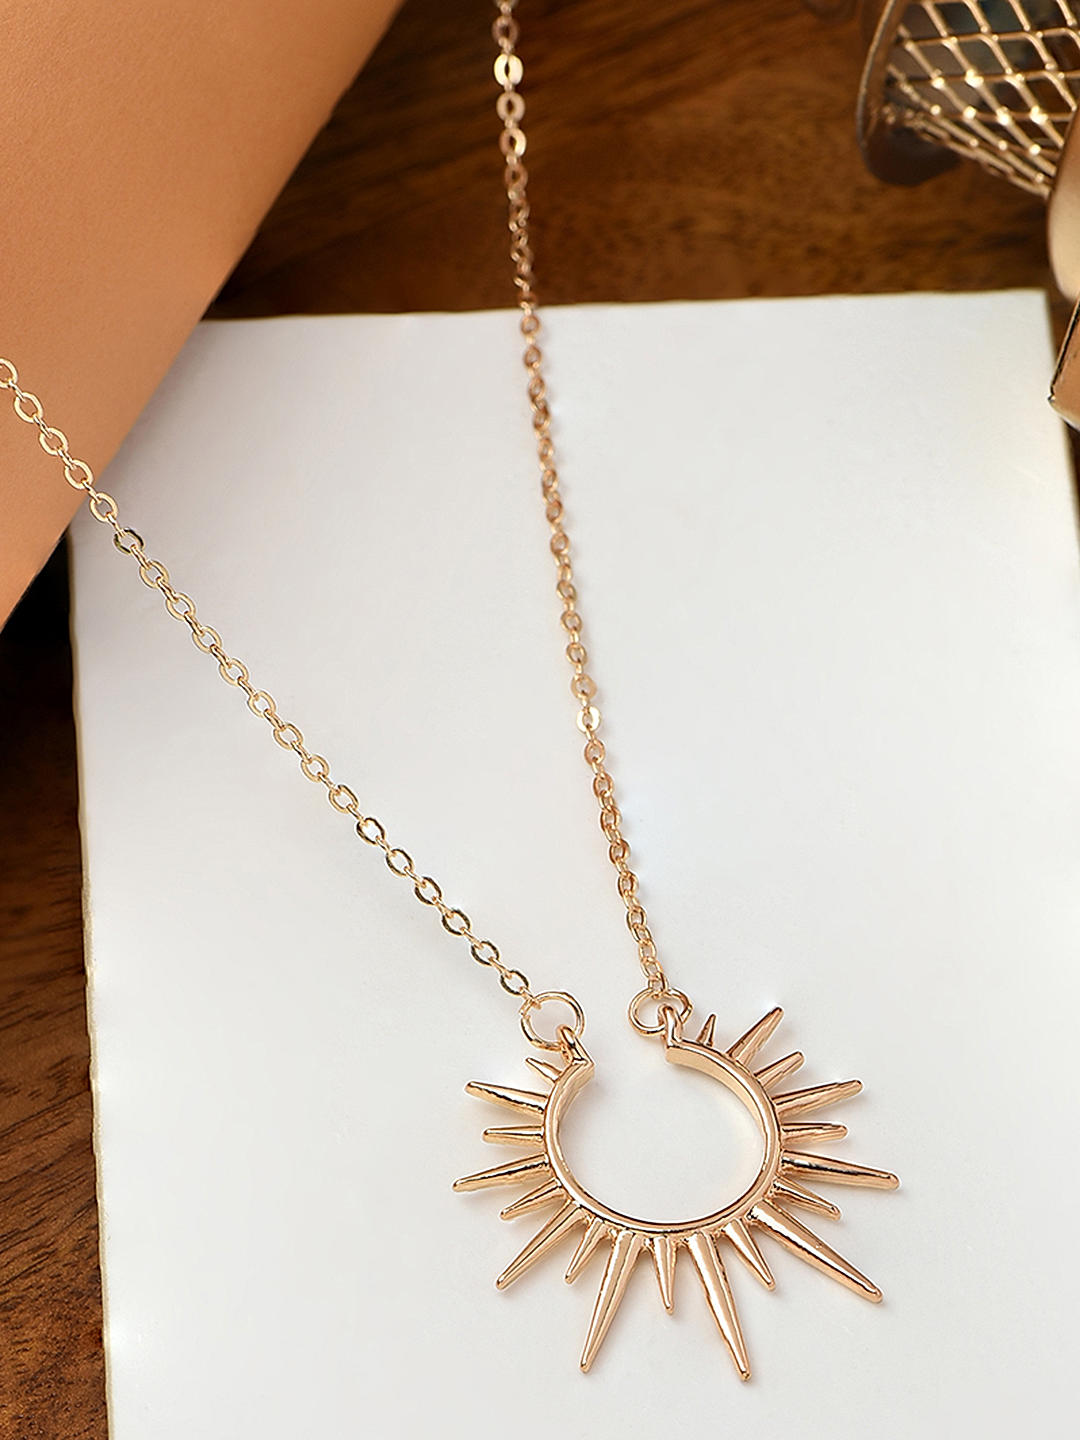 Gold Sun and Moon Delicate Pendant Necklace/ Golden Sun Totem Moon Night  Sky Jewelry/ Crystal Celestial Astrology Charm Gift for Women - Etsy Norway